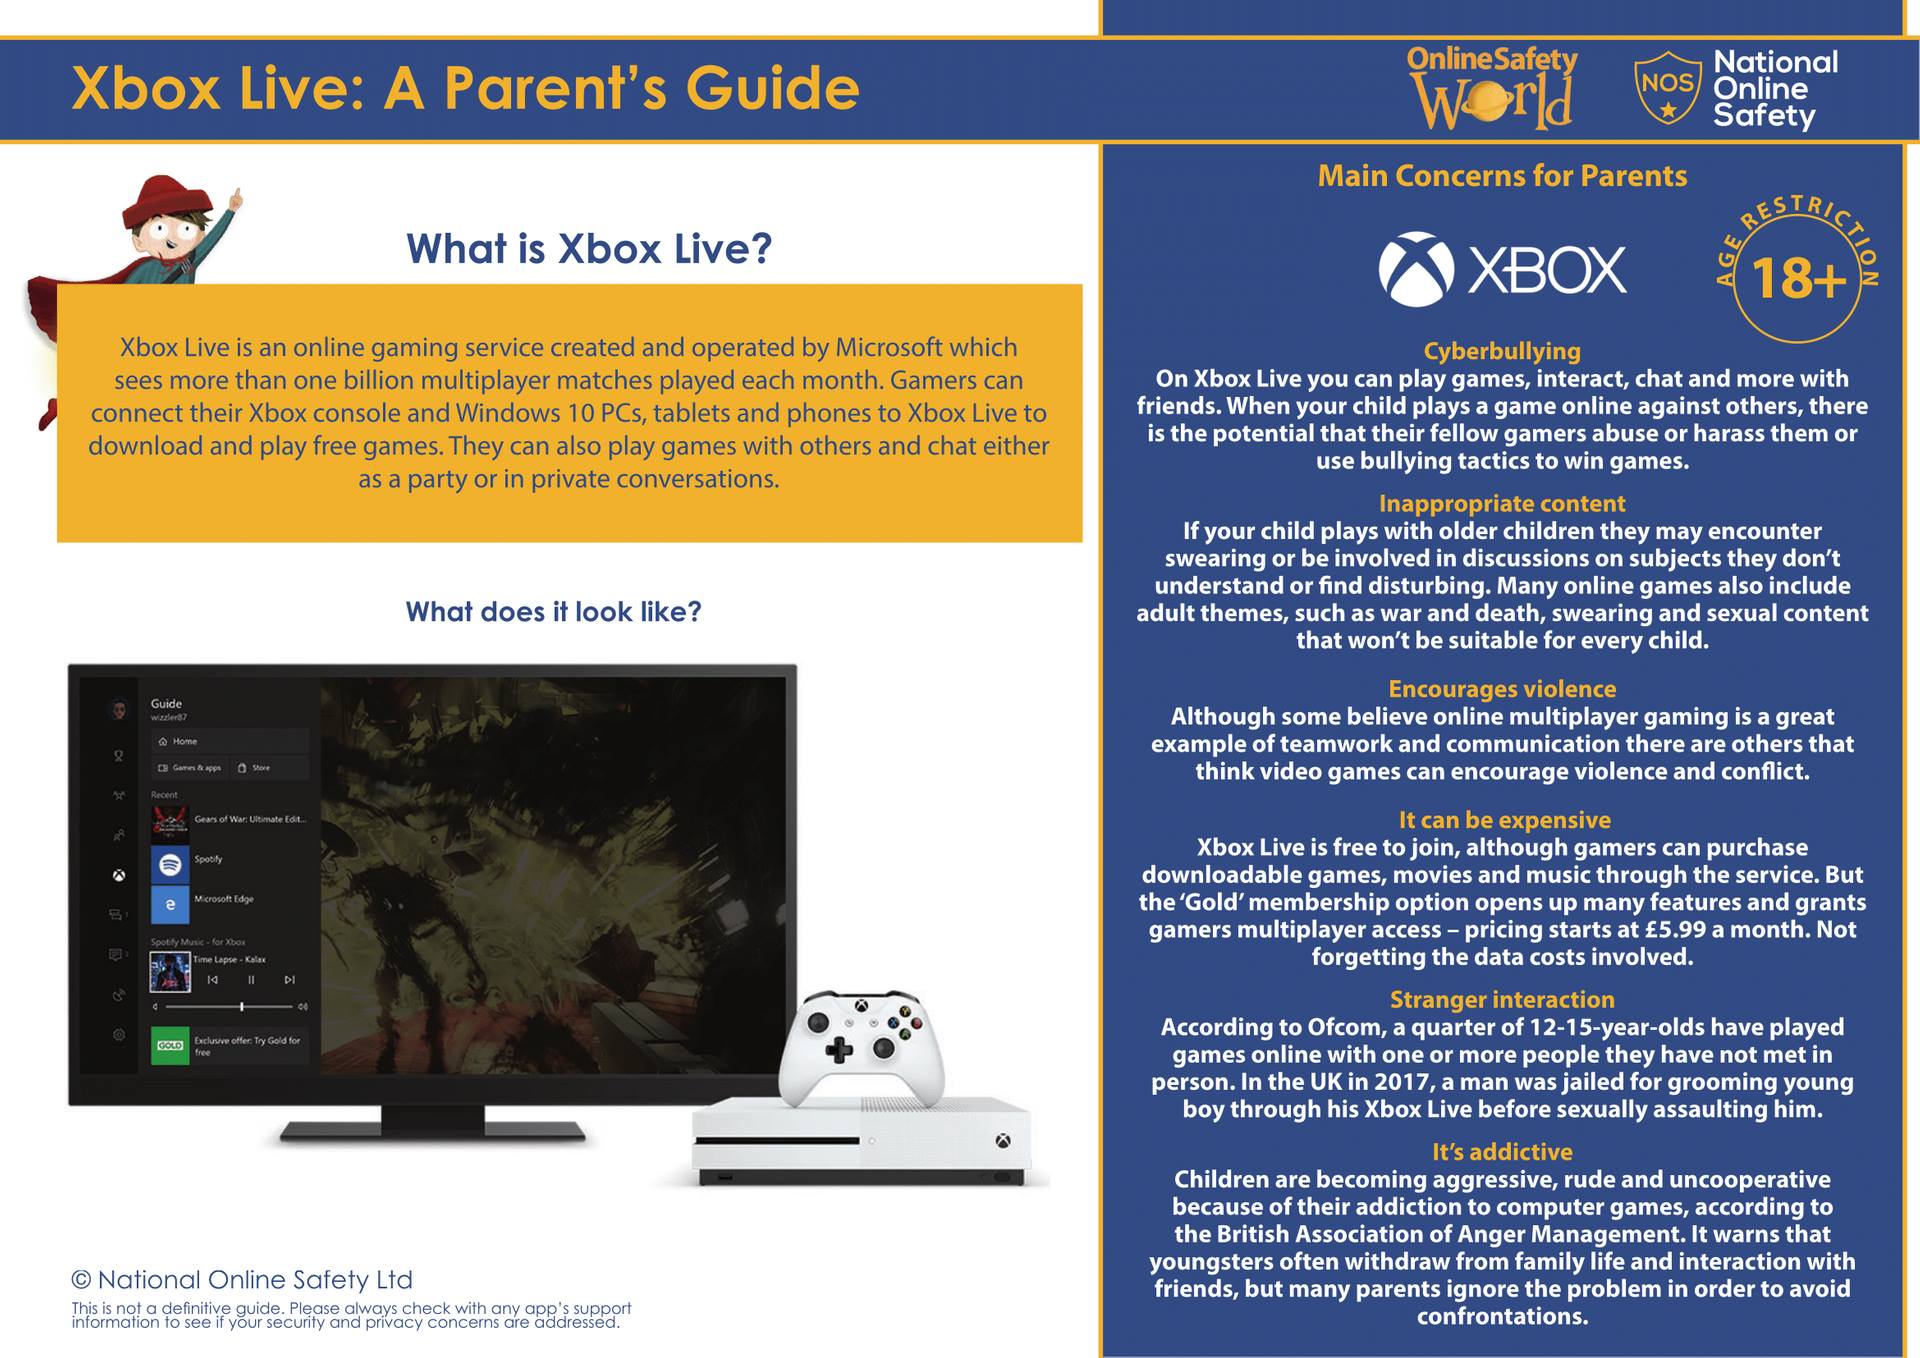 What parents need to know about Xbox Live